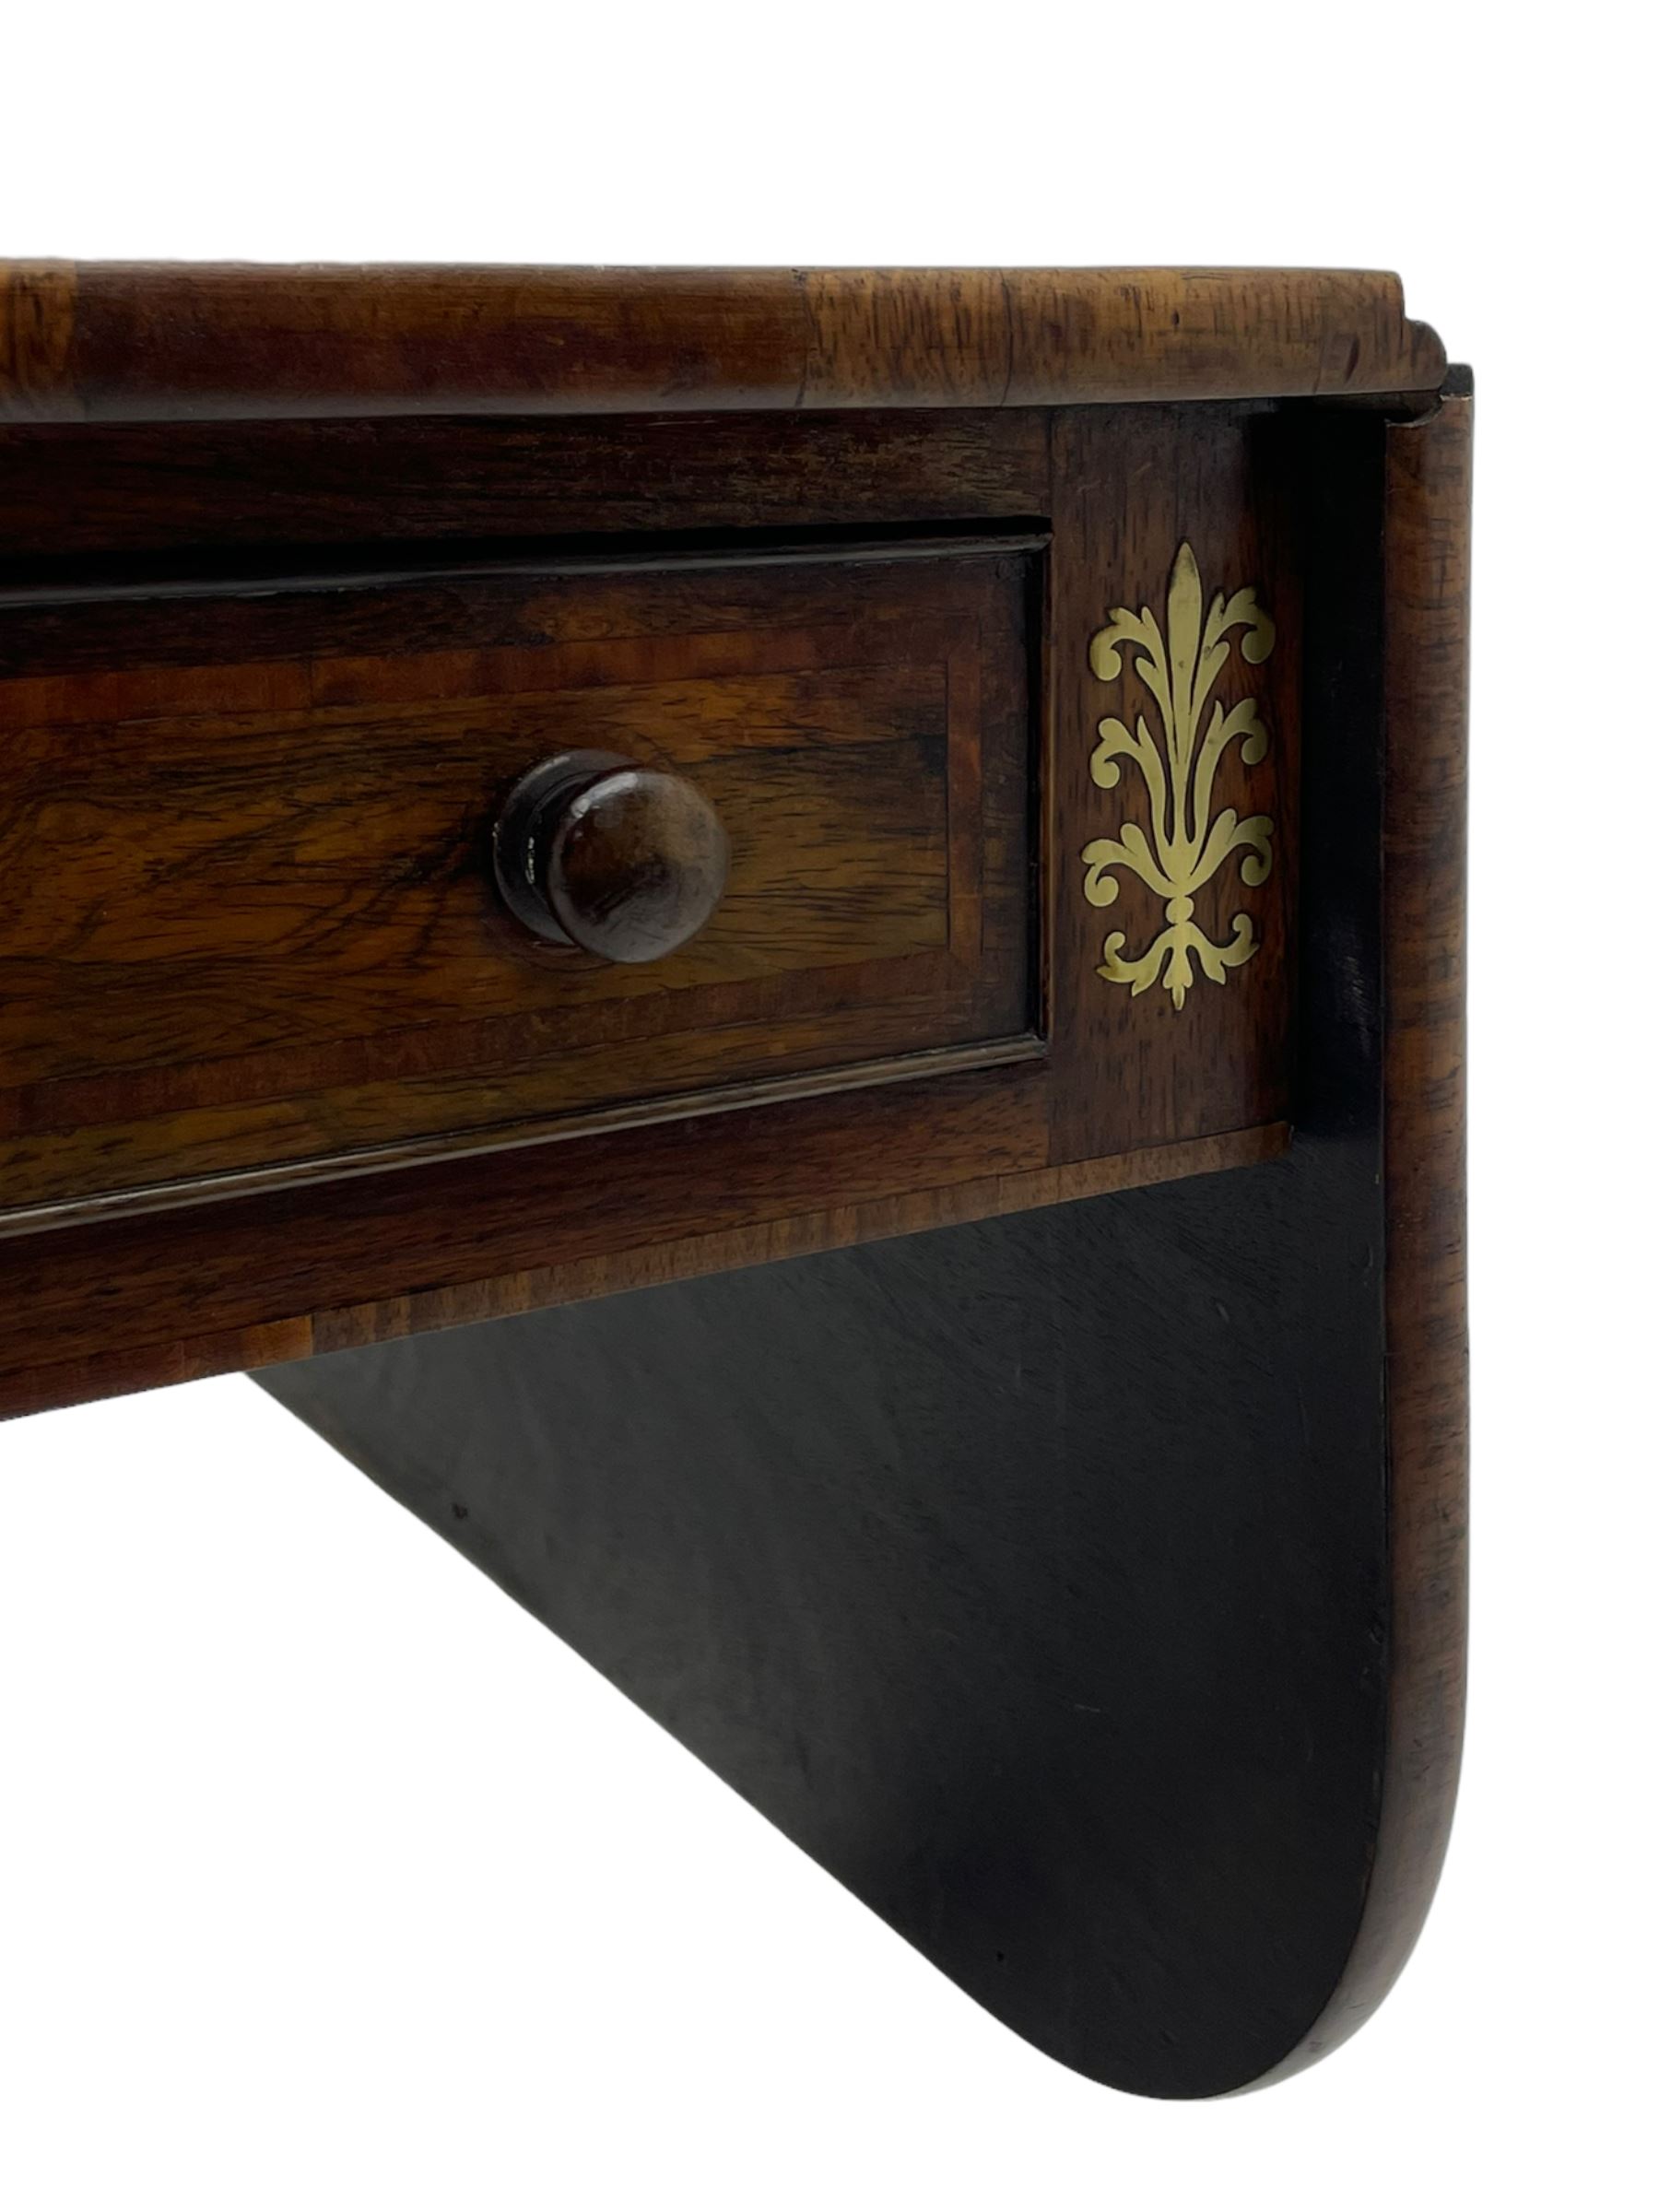 Regency rosewood and brass inlaid sofa table - Image 5 of 11